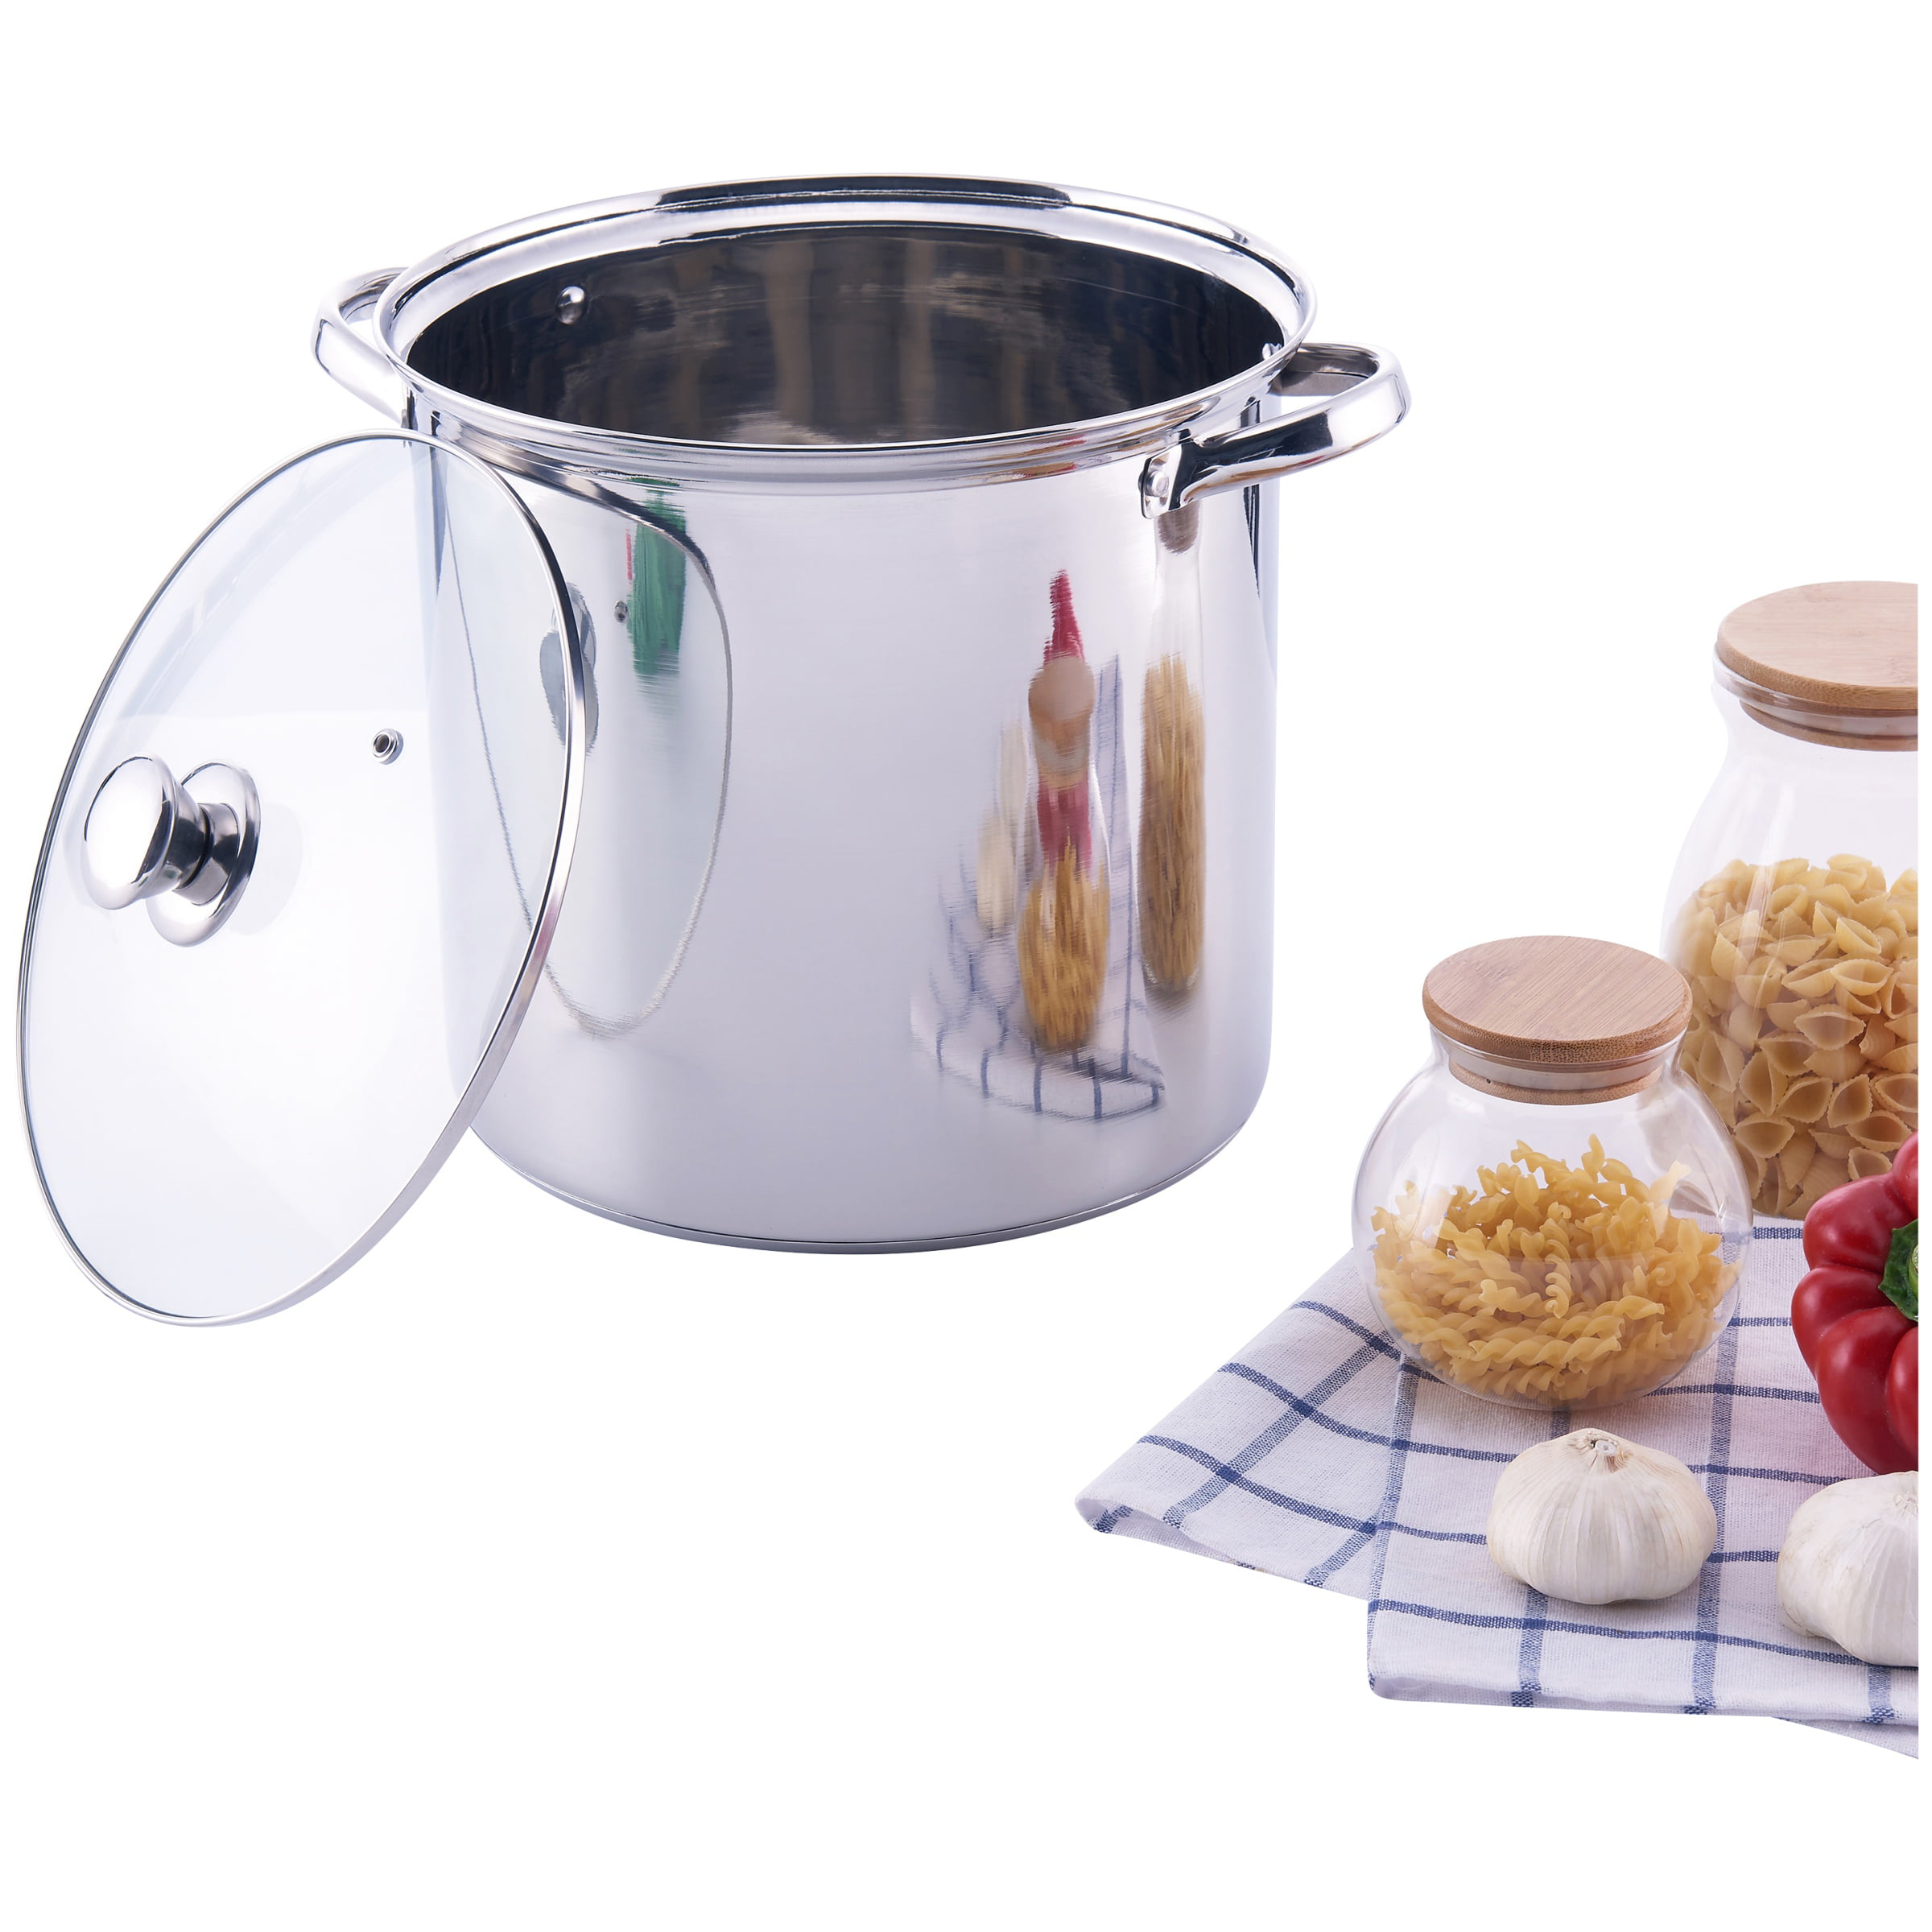 Mainstays Stainless Steel Stock Pot with Glass Lid - 16 qt